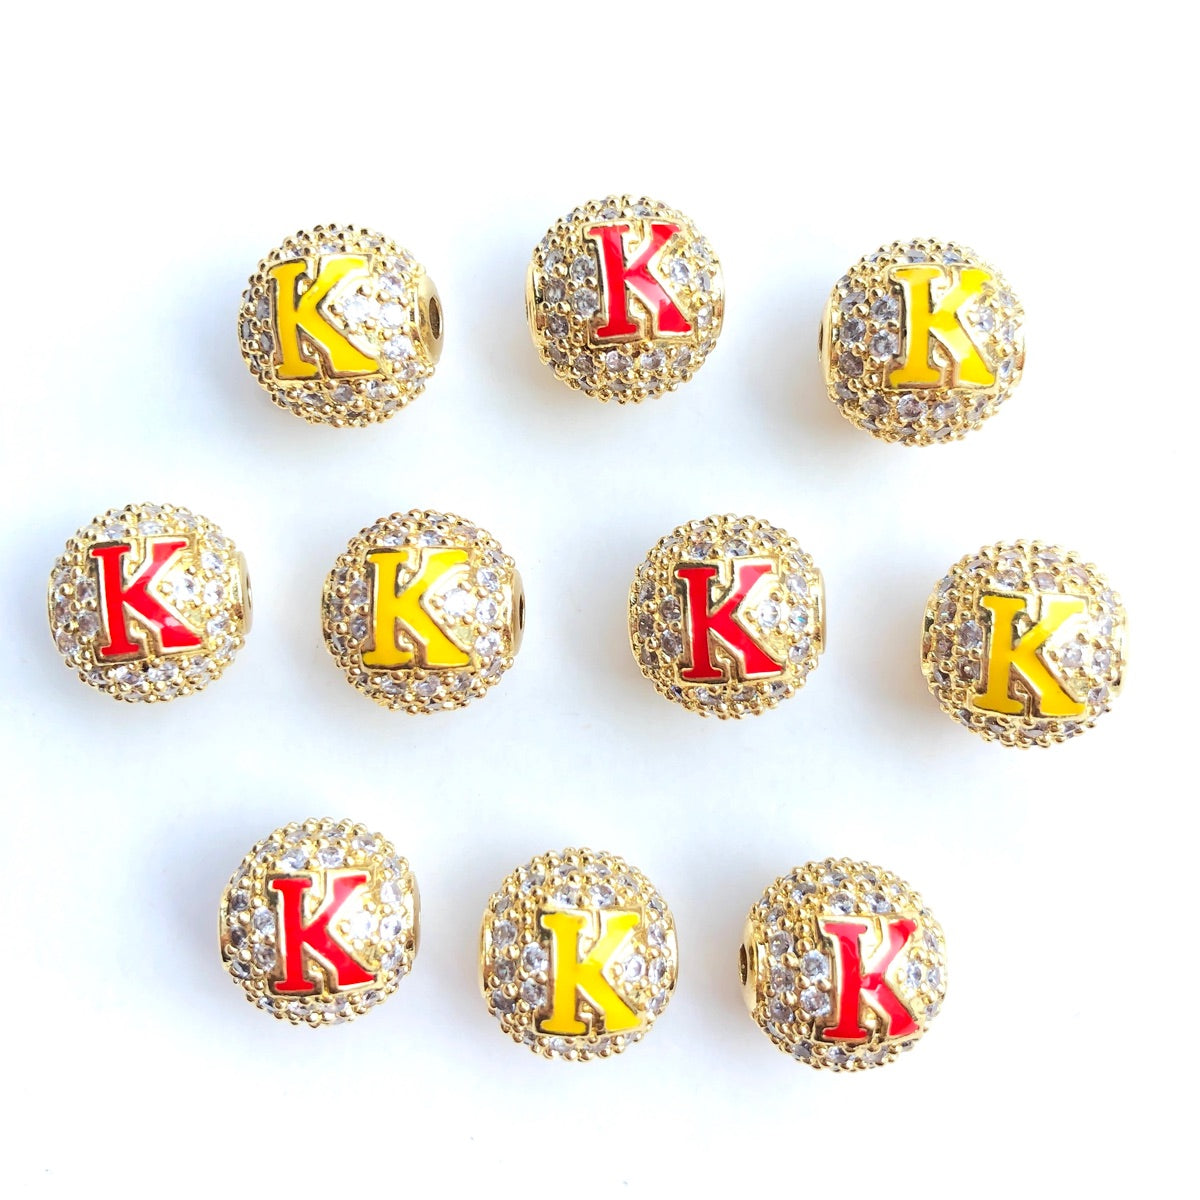 12pcs/lot 10mm Red Yellow Enamel CZ Paved Greek Letter "K", "A", "Ψ" Ball Spacers Beads 12 Gold K CZ Paved Spacers 10mm Beads Ball Beads Greek Letters New Spacers Arrivals Charms Beads Beyond